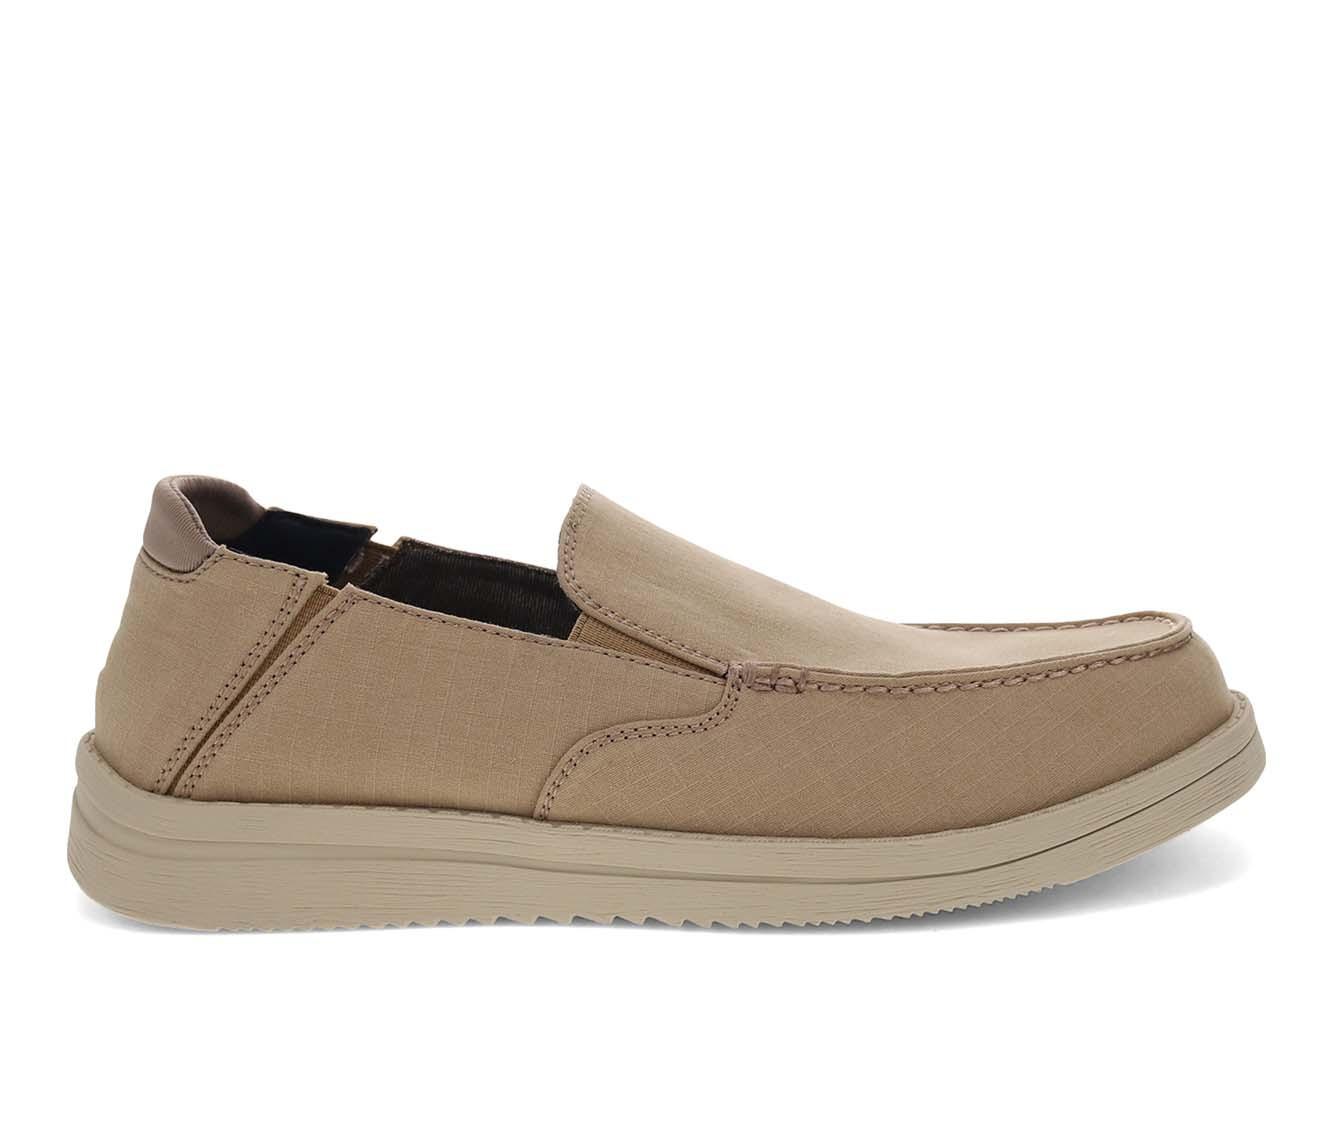 Men's Dockers Wiley Casual Loafers